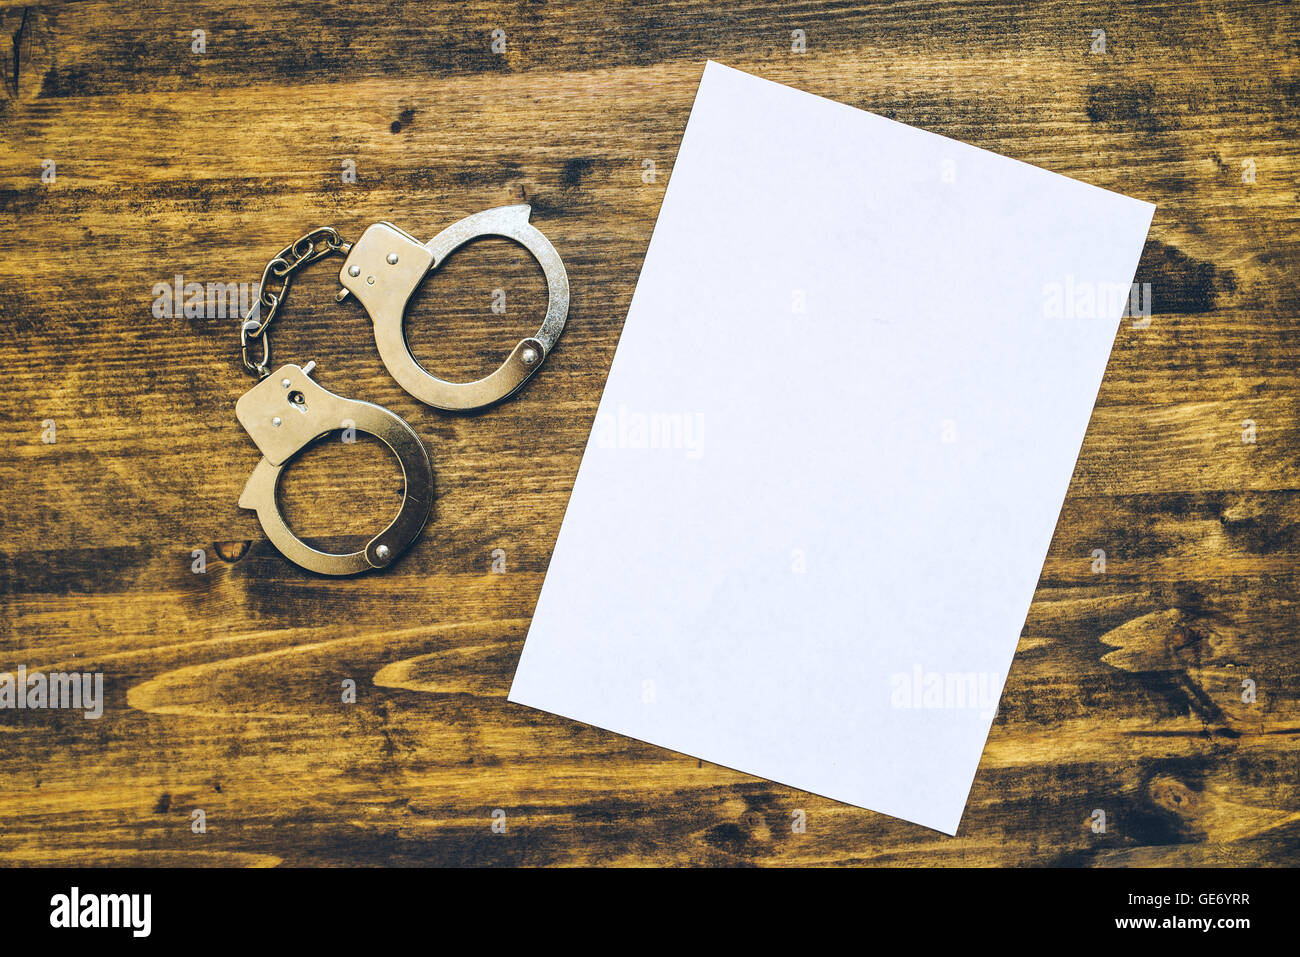 Police handcuffs and blank paper on investigator detective's work desk, concept of law and crime. Stock Photo